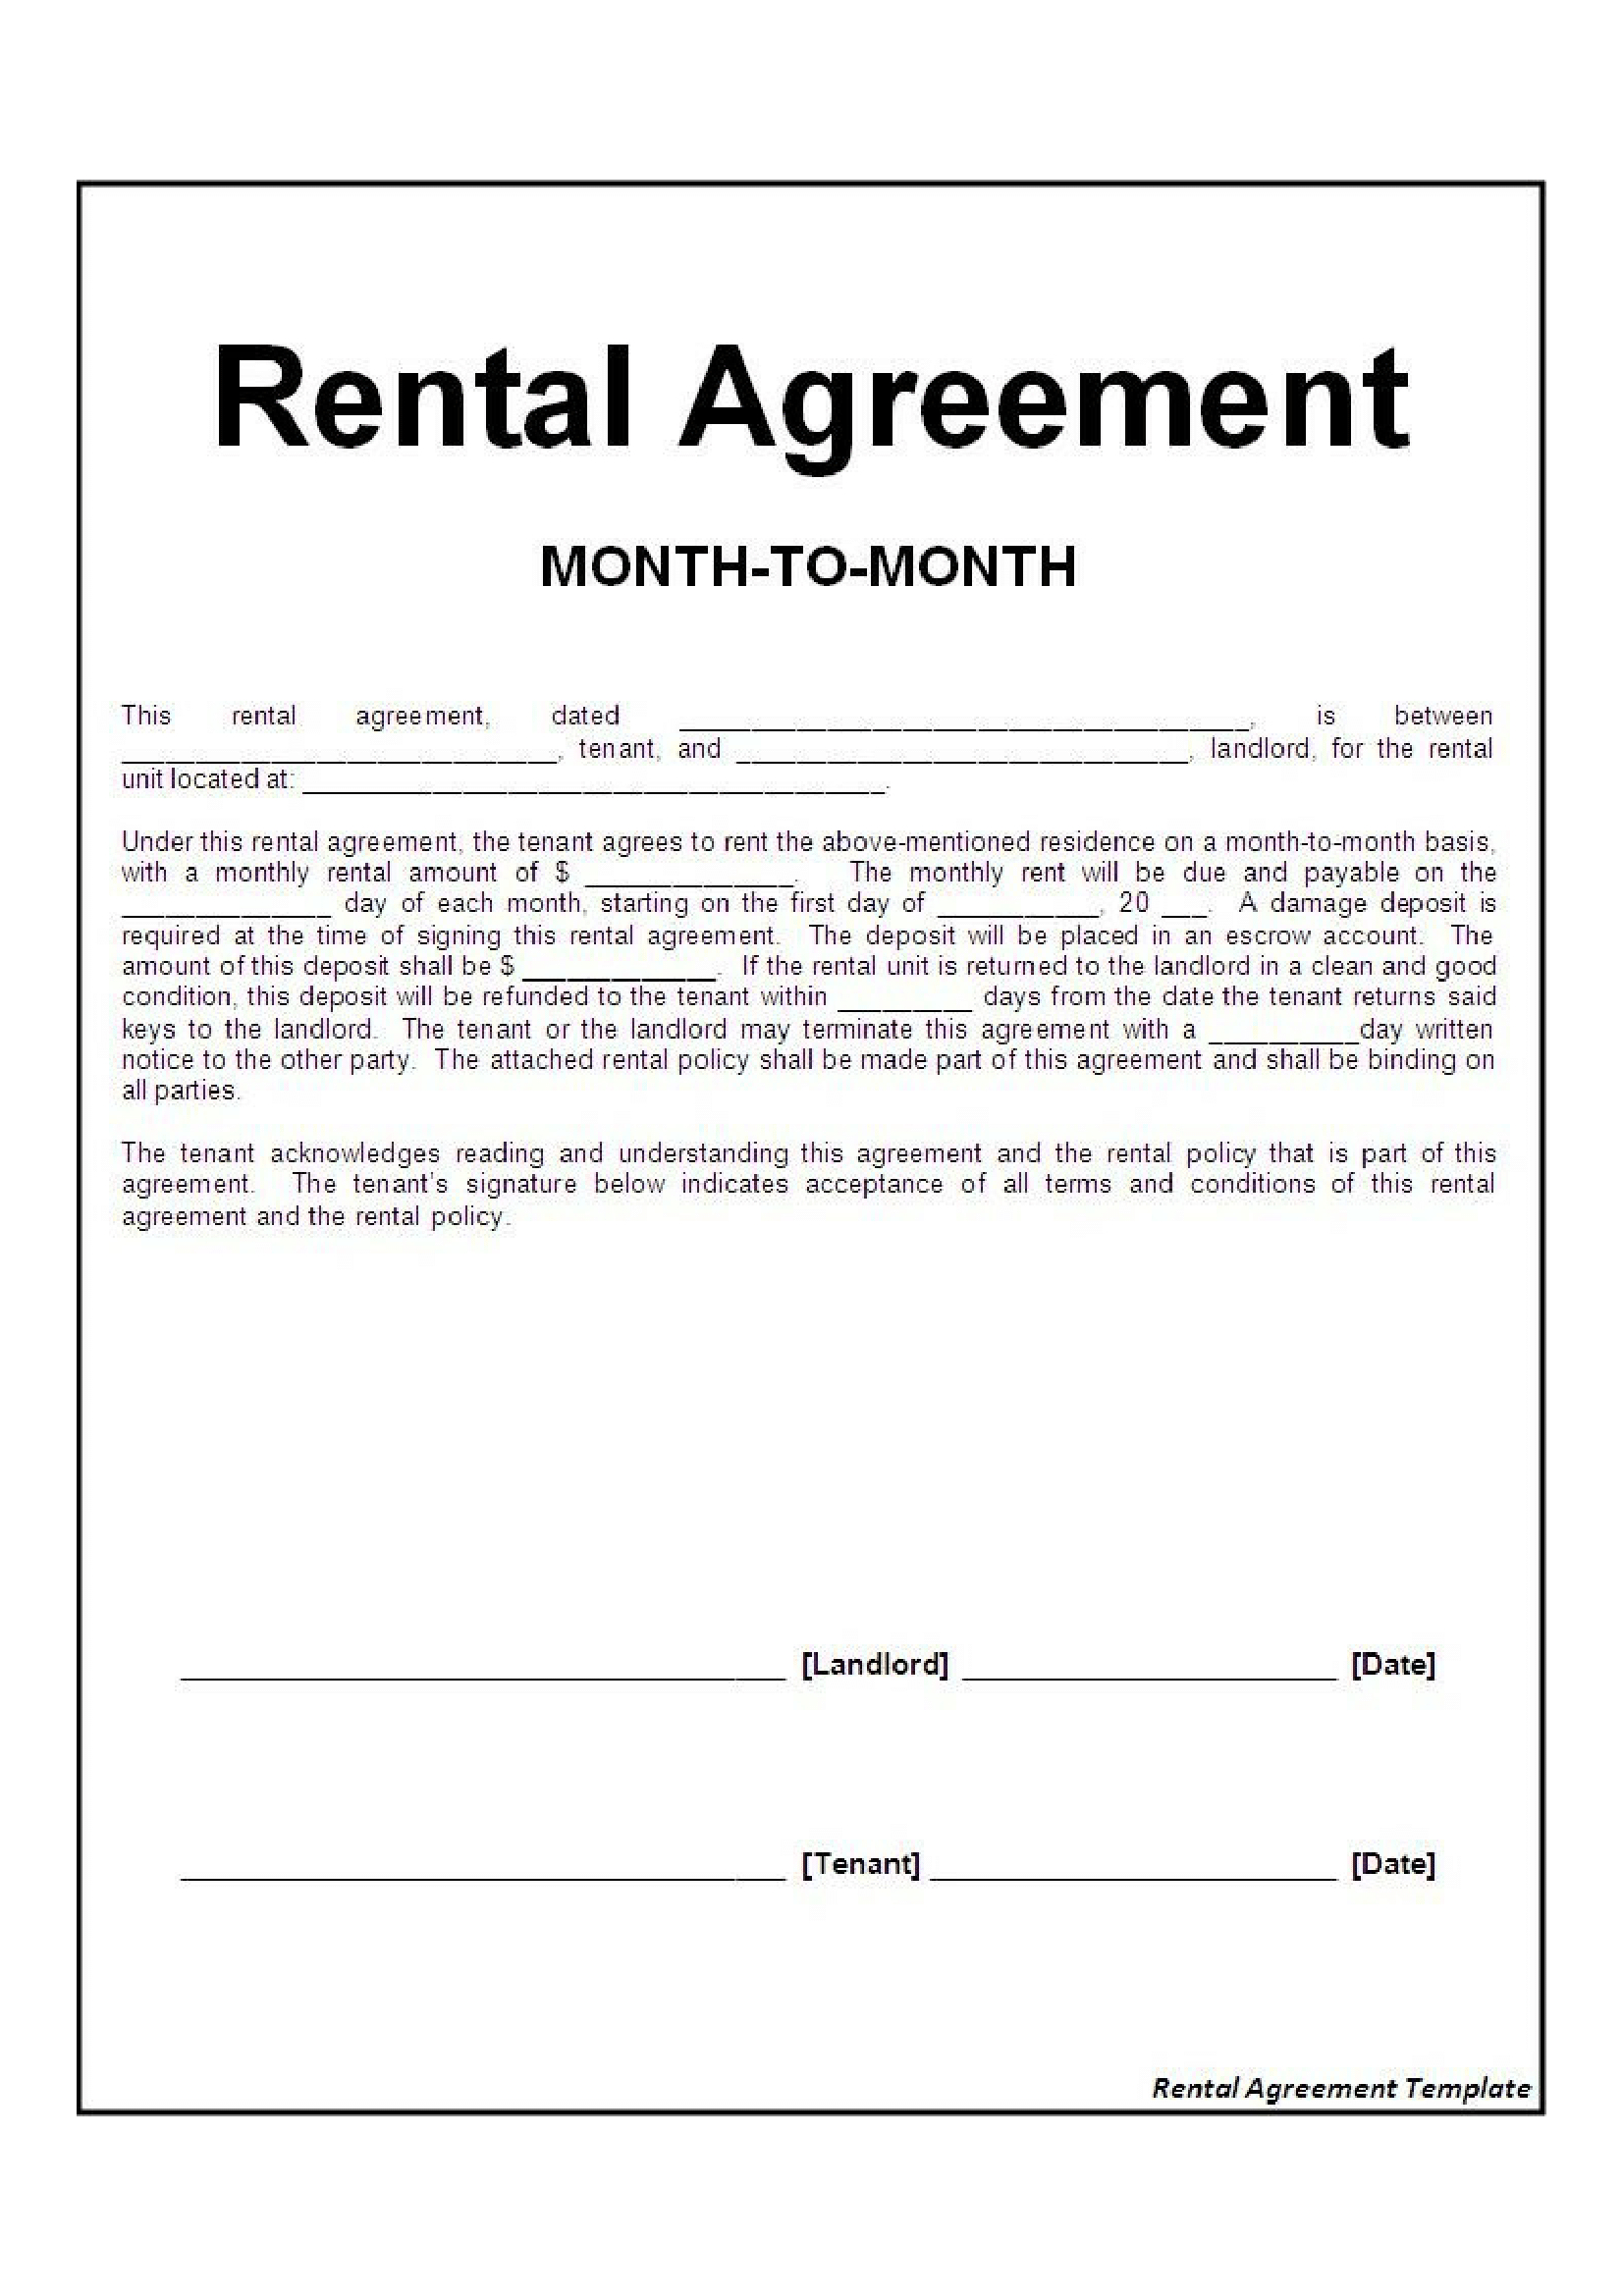 Rental Agreement Example Month To Month Rental Agreement Form Free Download